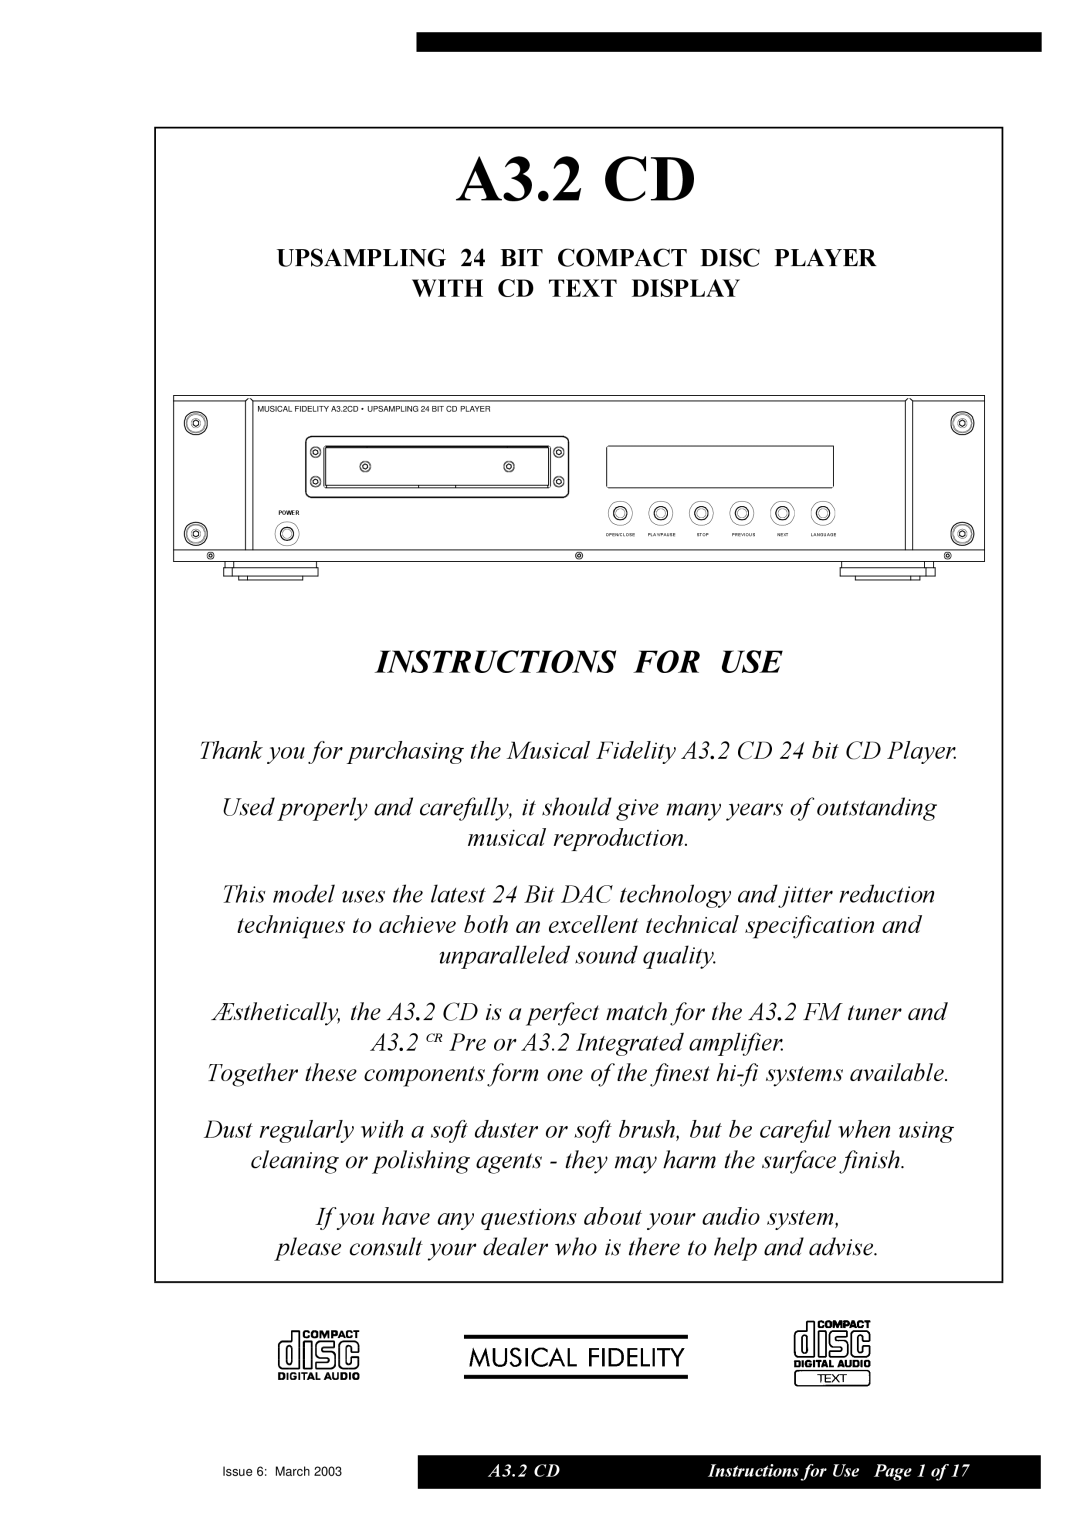 Musical Fidelity A3.2 CD manual Instructions For Use, UPSAMPLING 24 BIT COMPACT DISC PLAYER, With Cd Text Display 